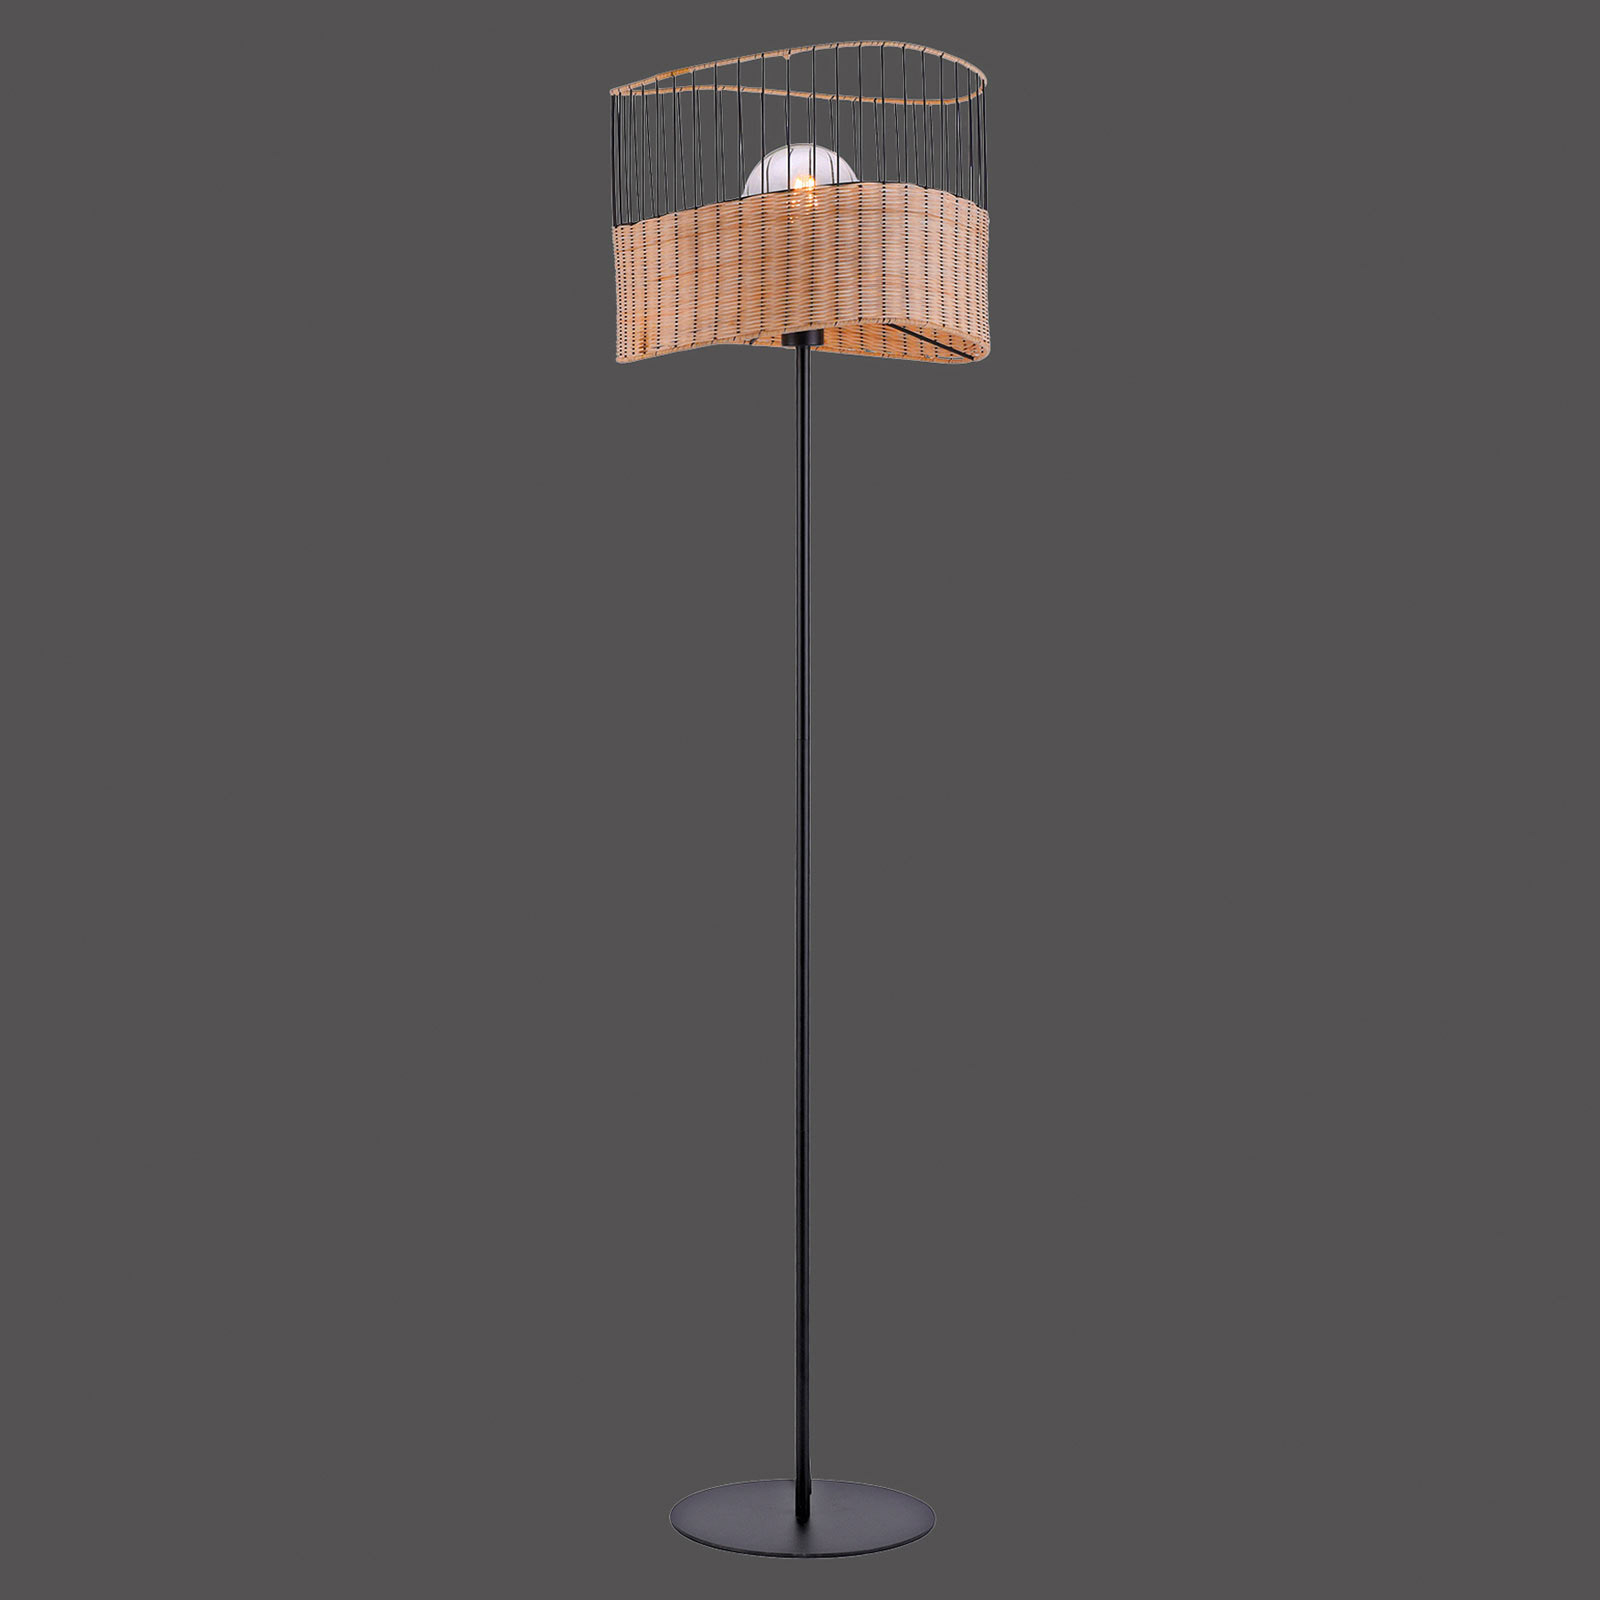 Reed floor lamp made of wood and metal